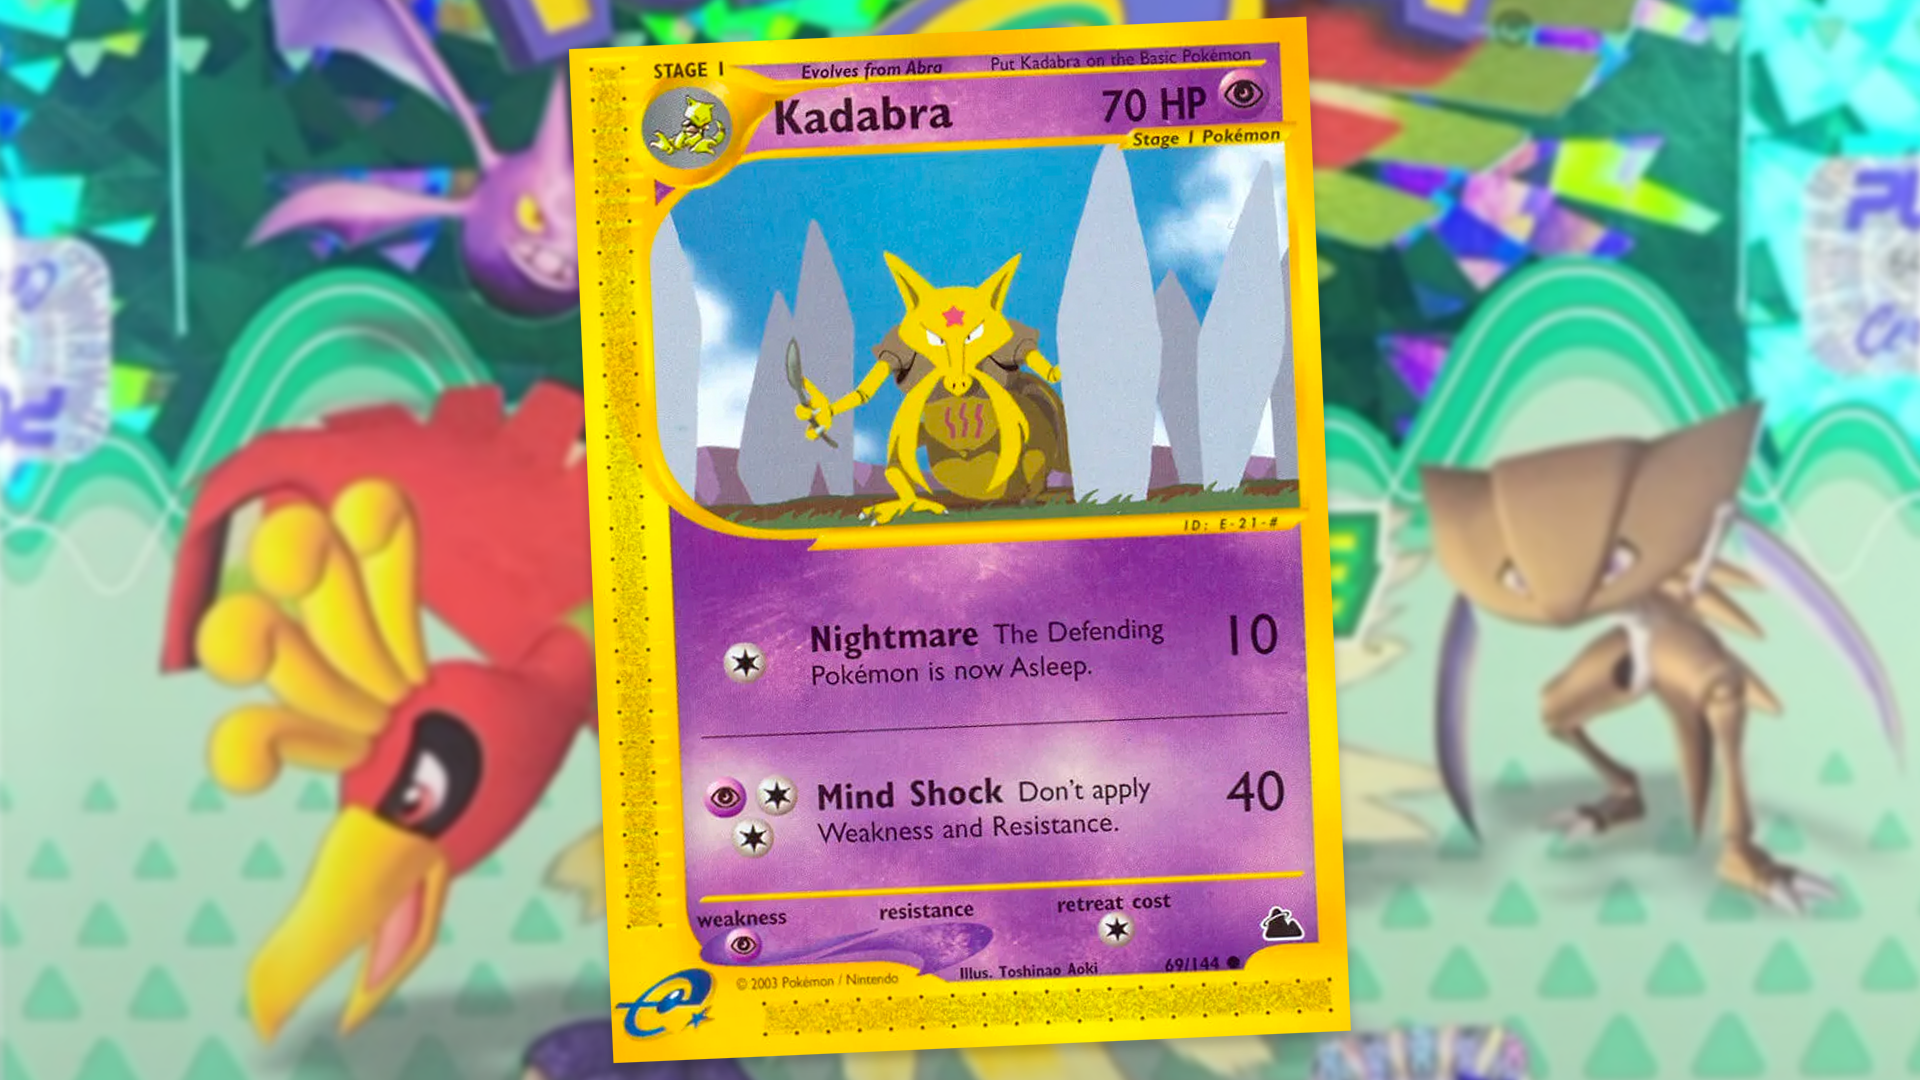 Image for Historic 2003 Pokémon booster box featuring last Kadabra appearance before 20-year Uri Geller ban appears at auction